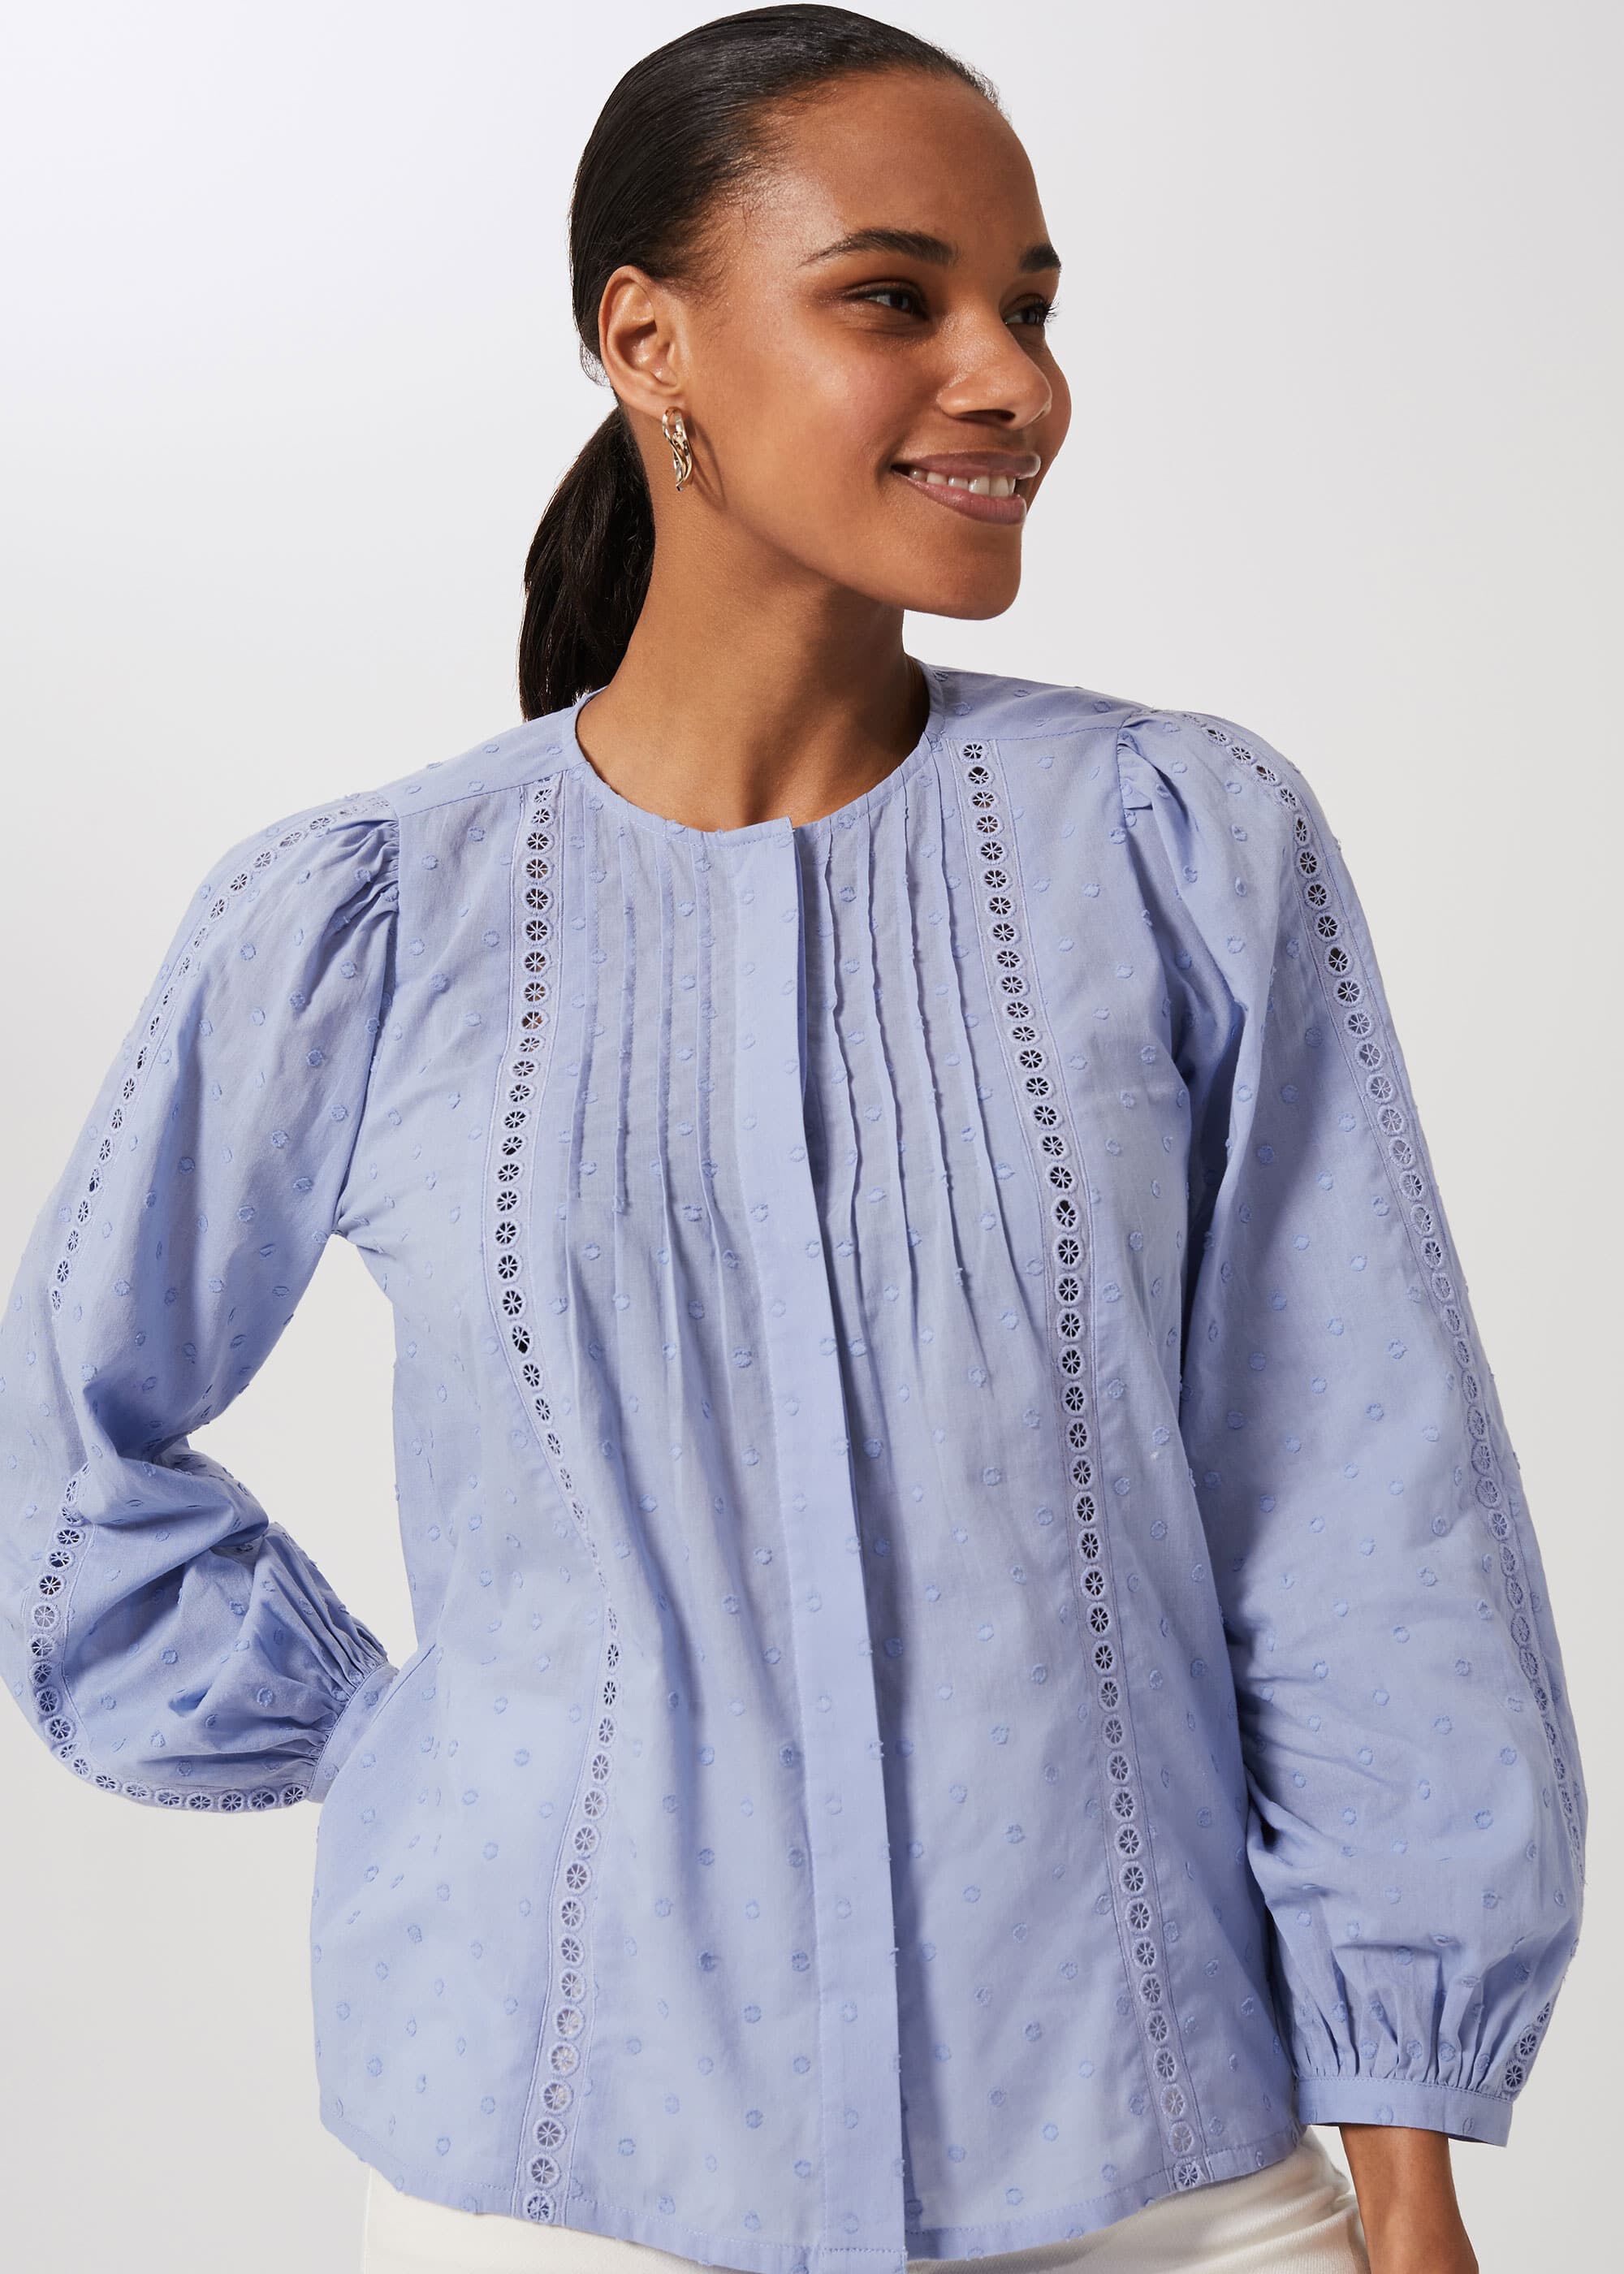 Joella Embroidered Top